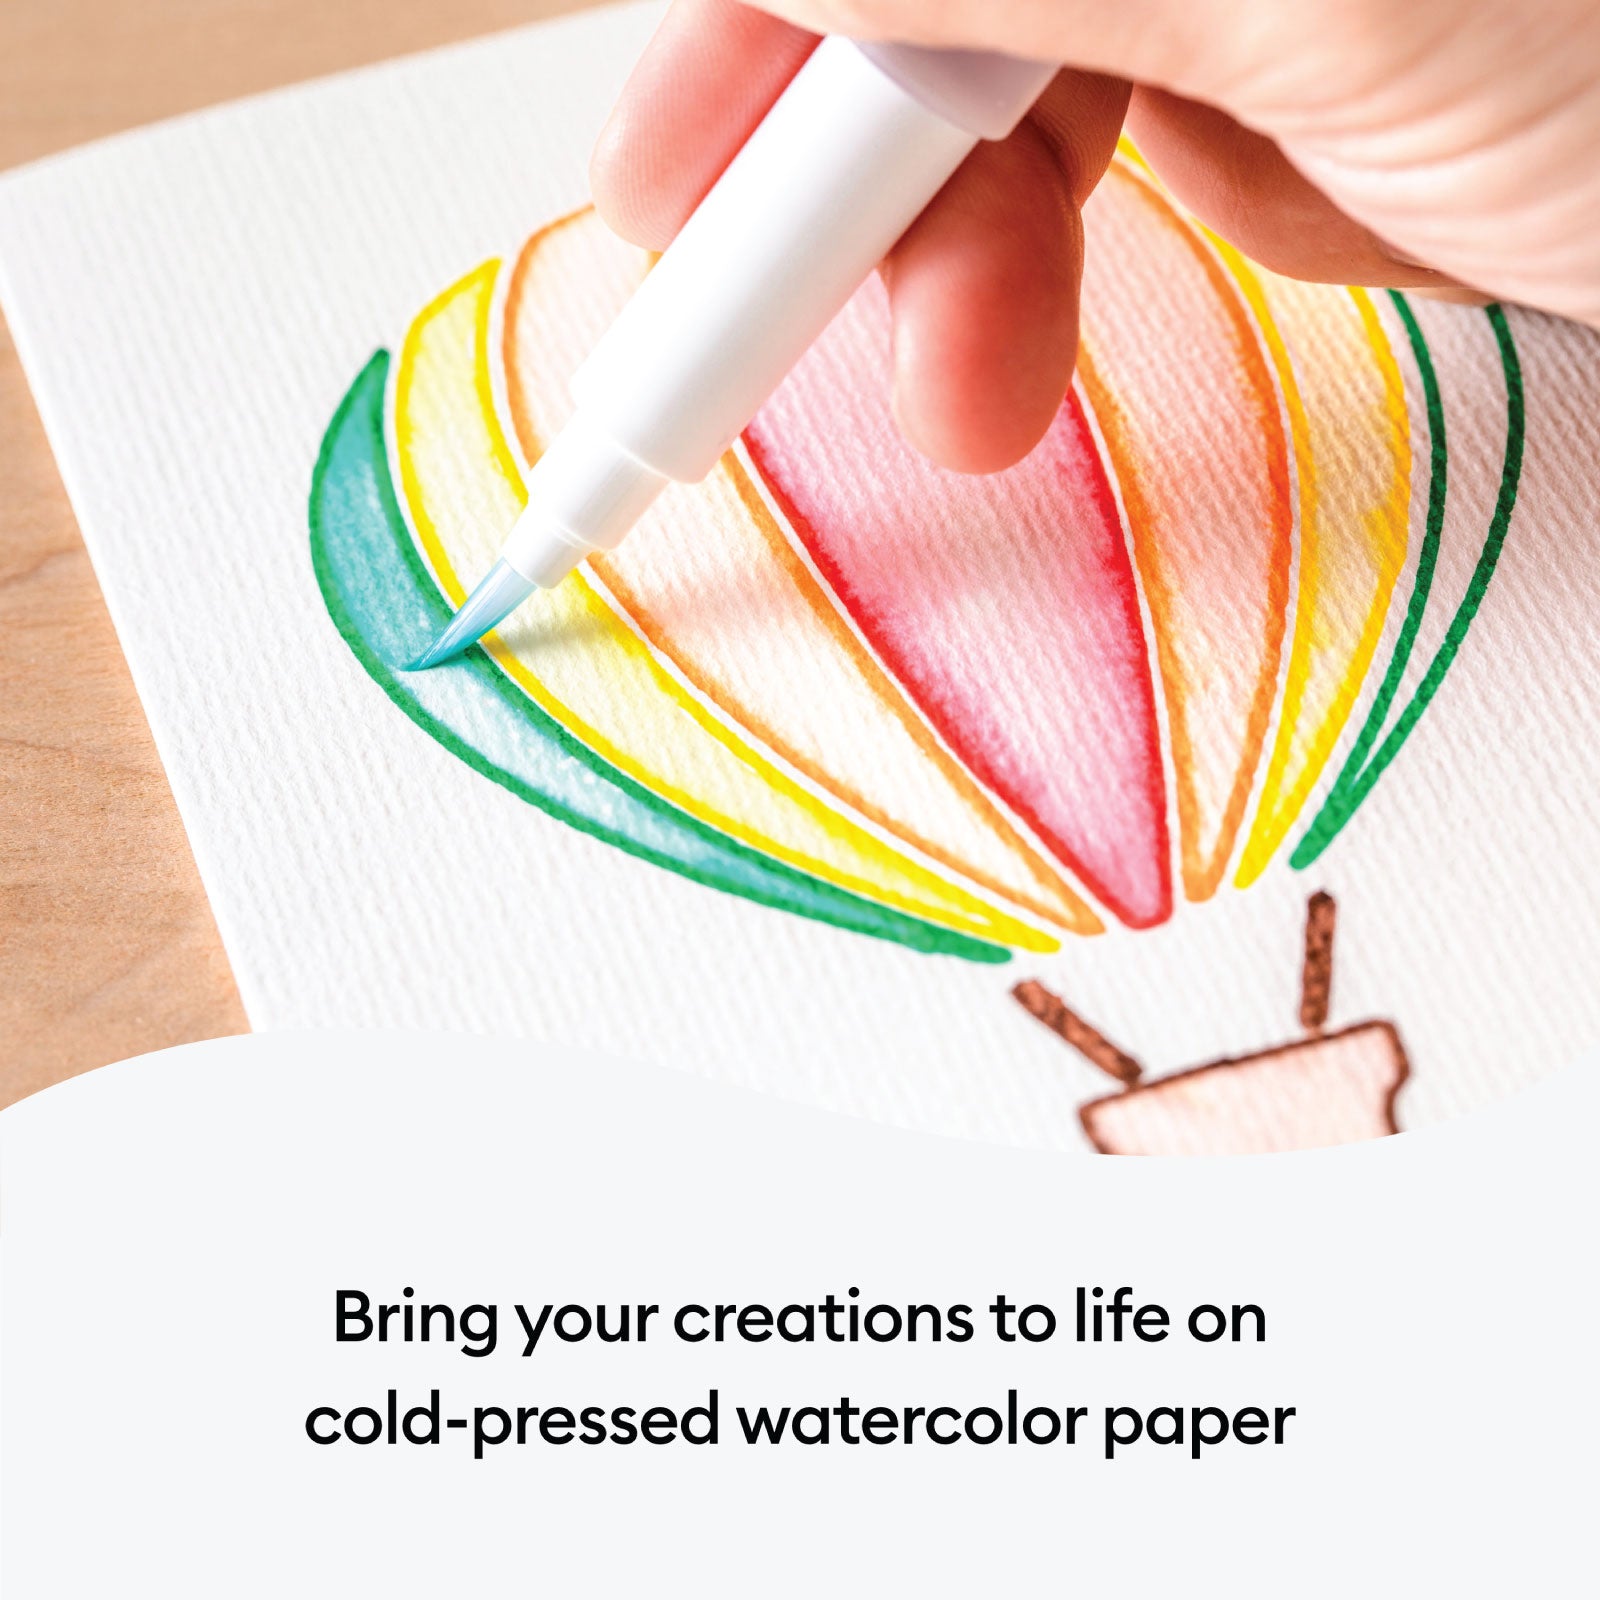 Cricut R20 Watercolor Cards with Rainbow Watercolor Markers and 2x2 Card Mat Bundle